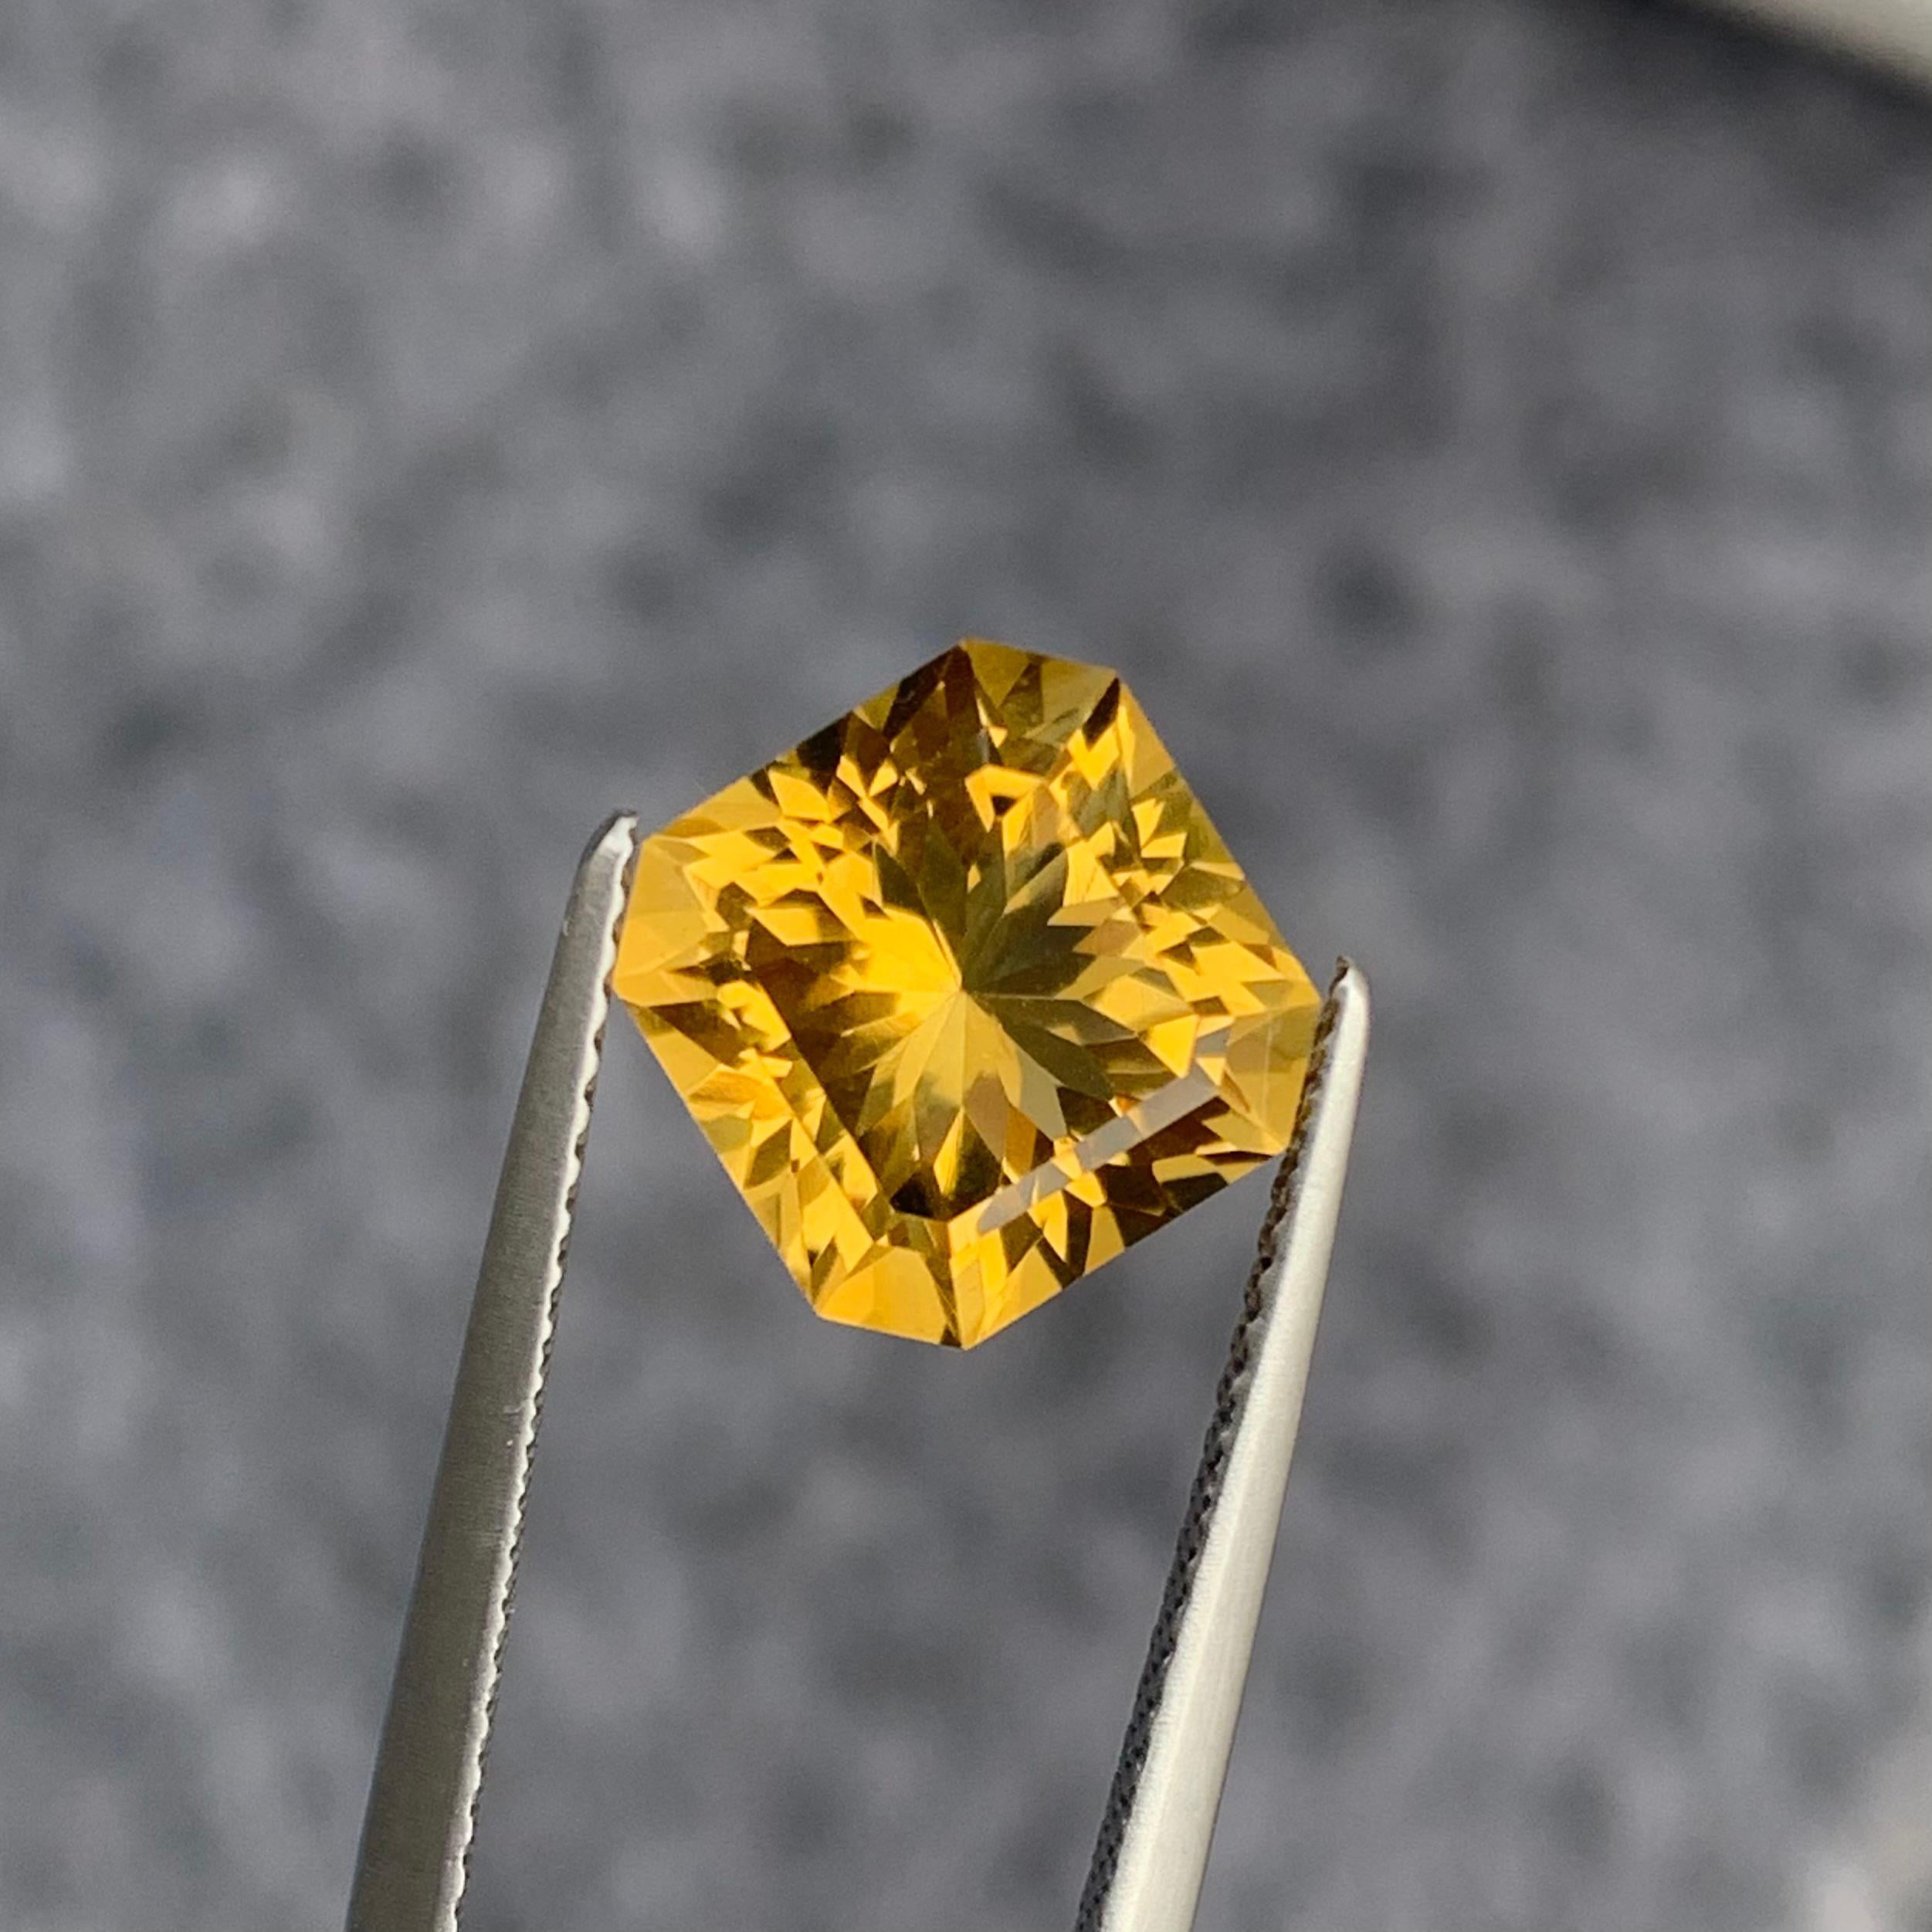 Gorgeous Flower Cut Faceted Yellow Citrine 3.80 Carat From Brazil For Sale 3